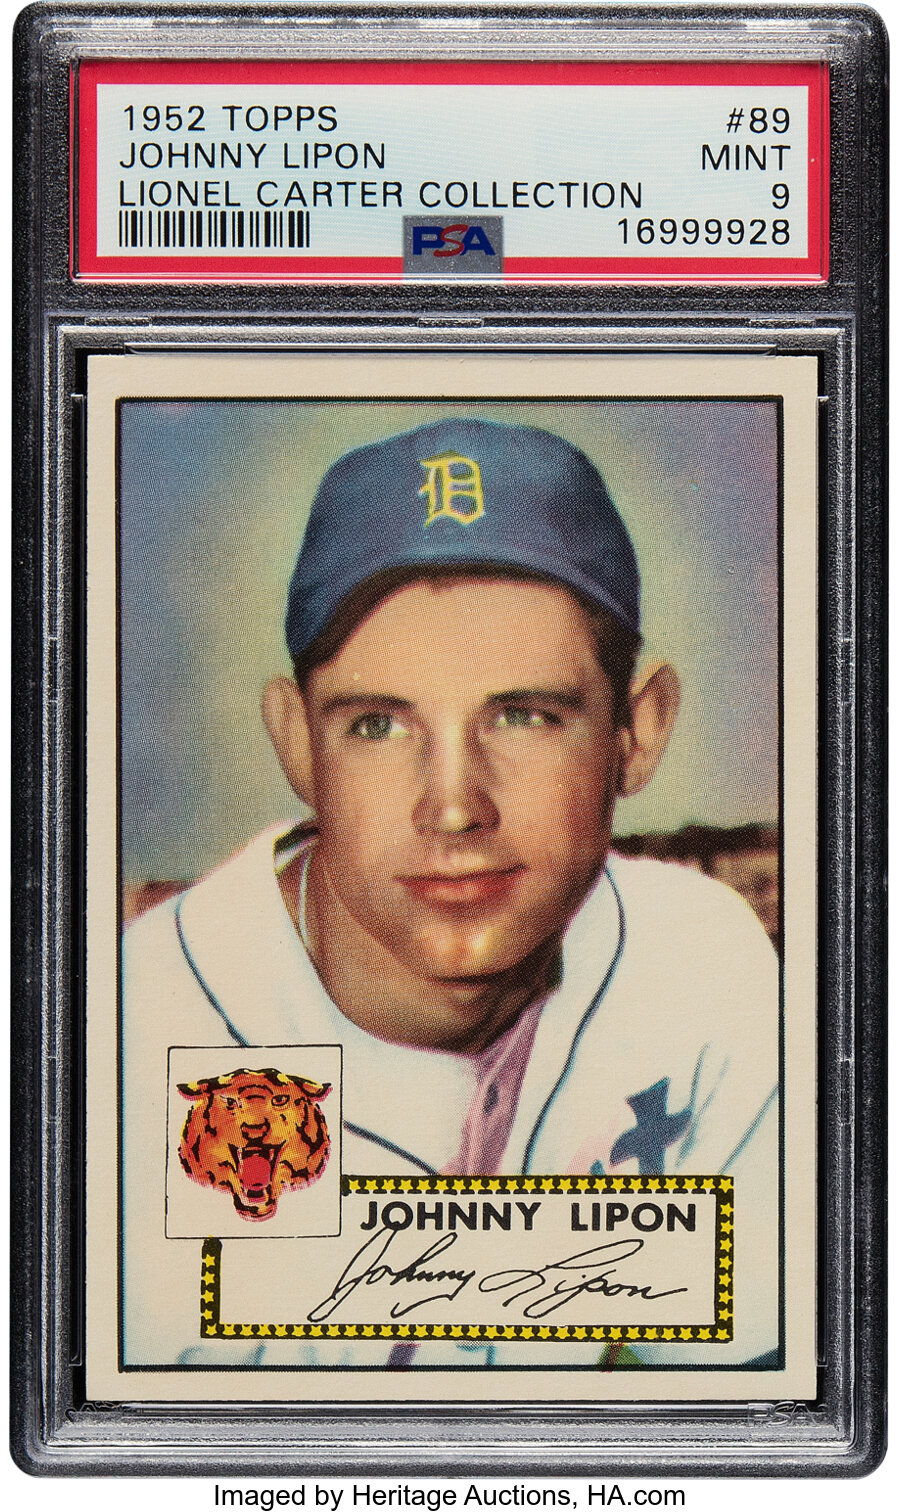 1952 Topps Johnny Lipon #89 PSA Mint 9 - Only One Higher! From the Lionel Carter Collection